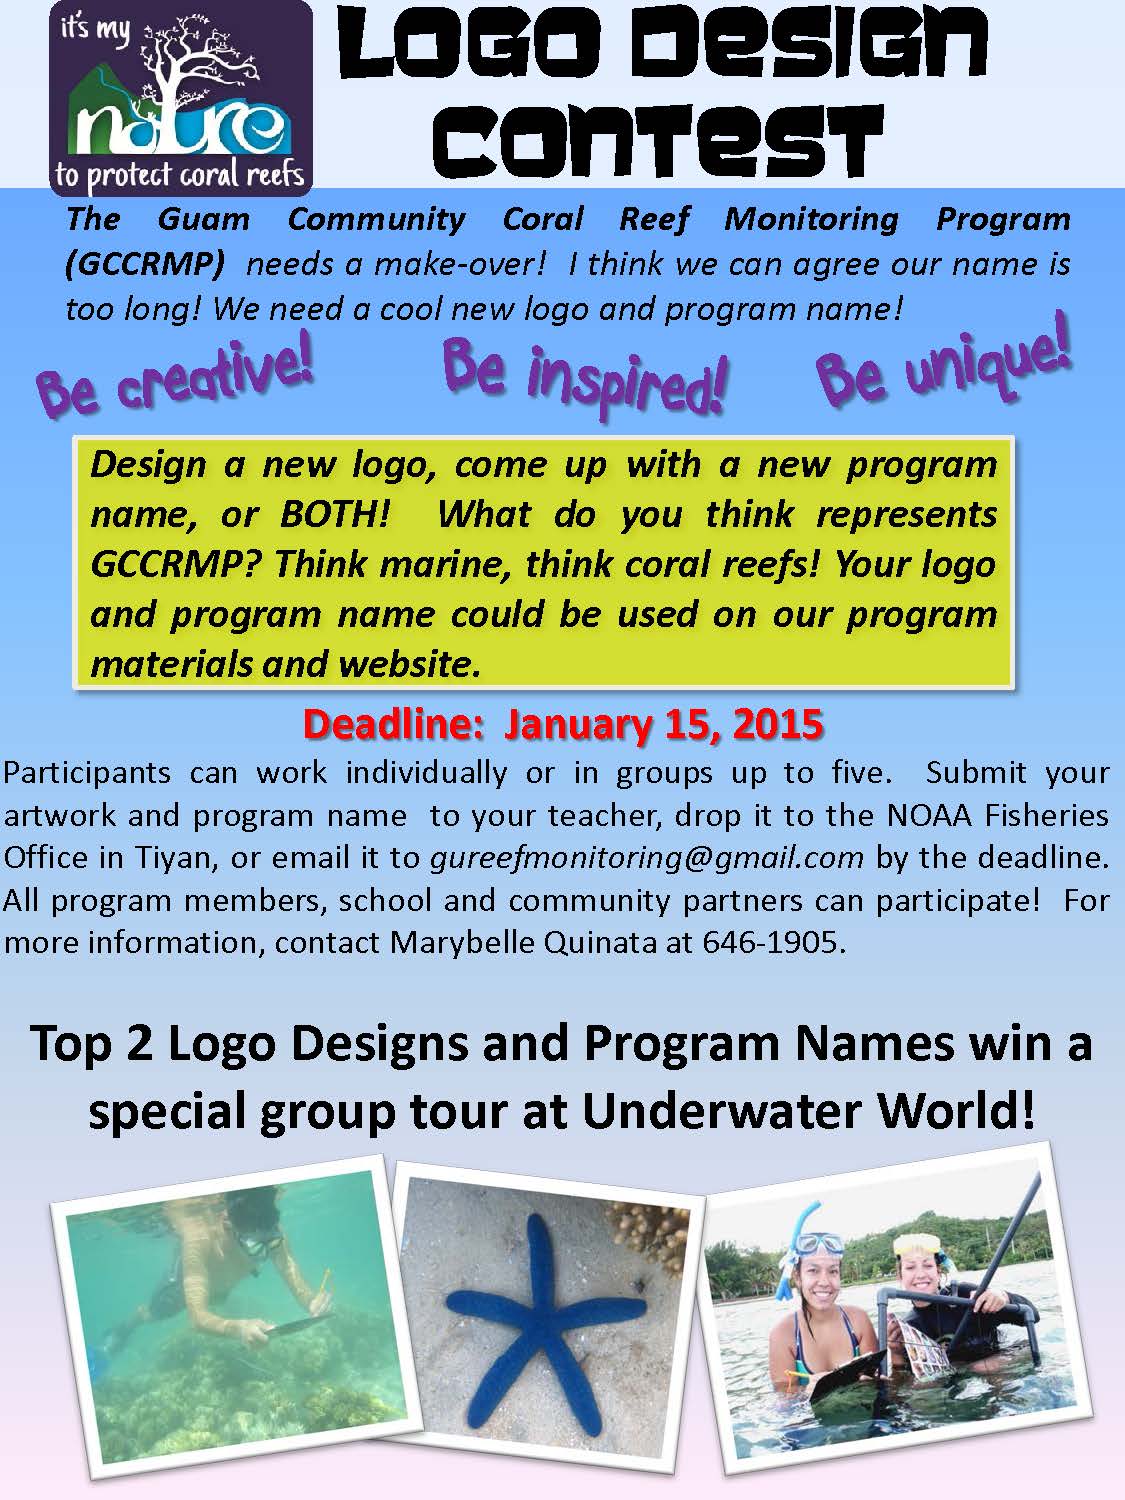 Help We Need A New Name And Logo Guam Community Coral Reef